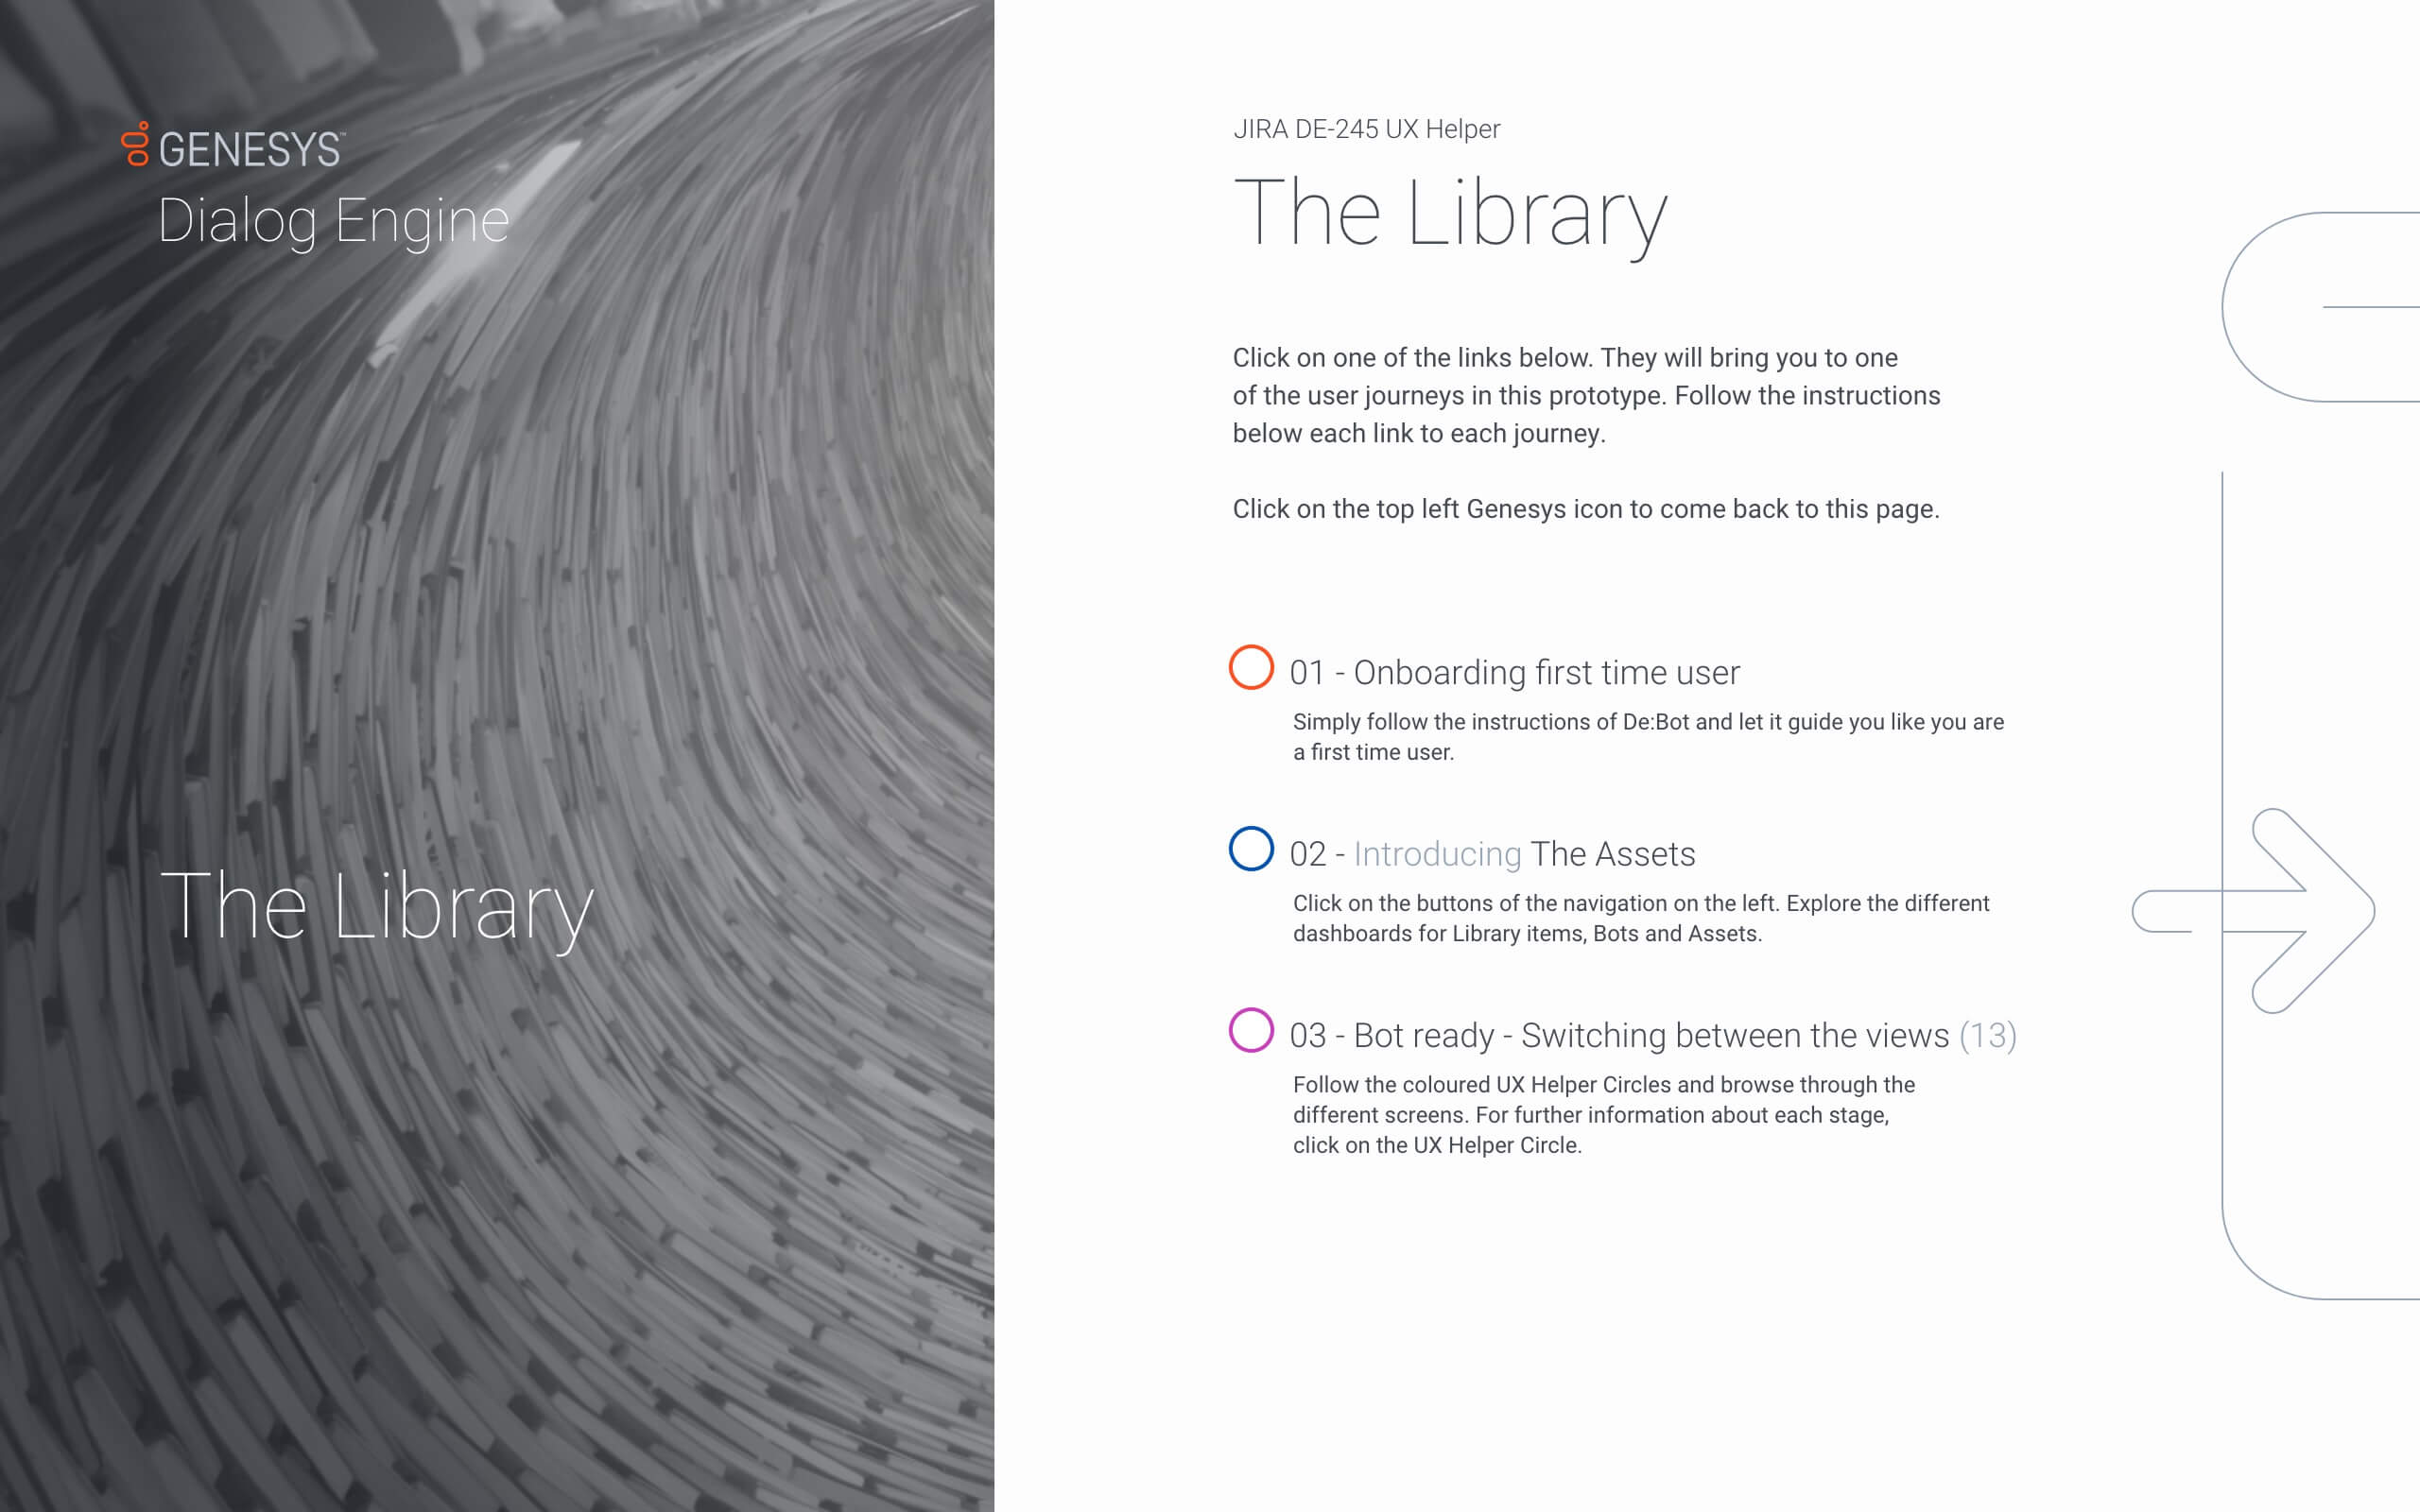 UX Helper start page for the library prototype that was used during the test